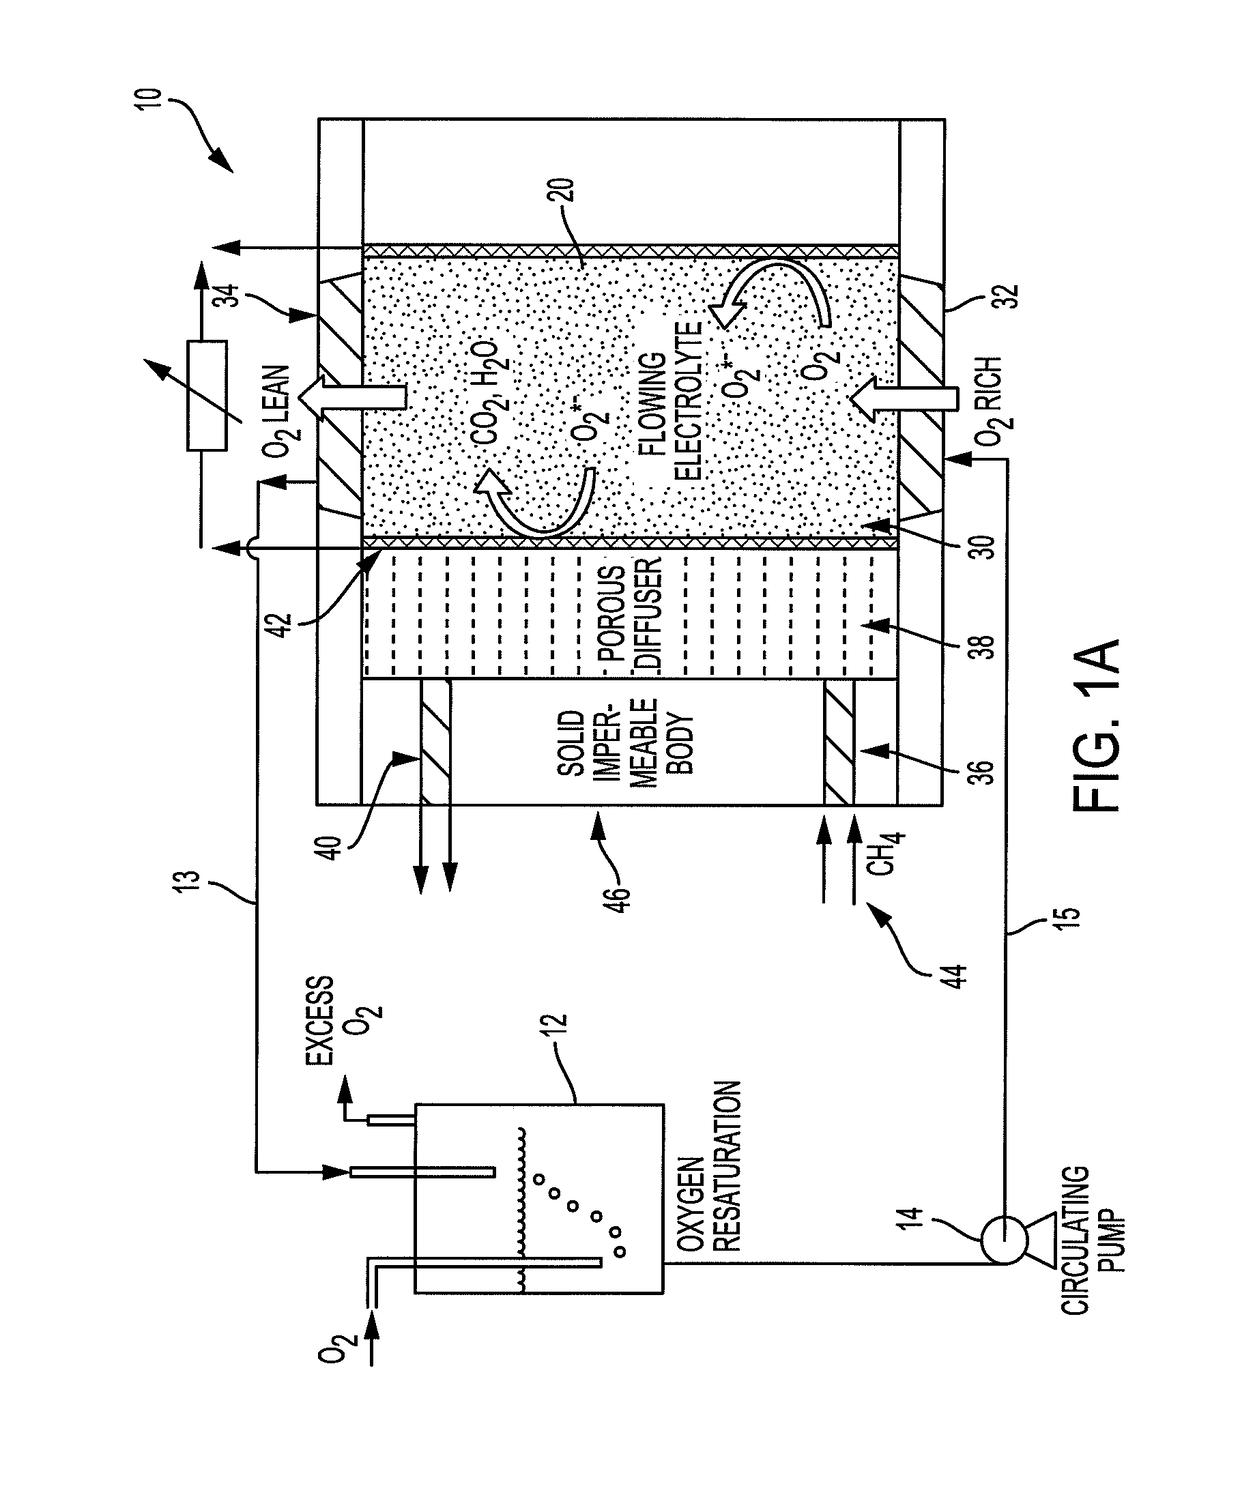 Flowing electrolyte fuel cell with improved performance and stability